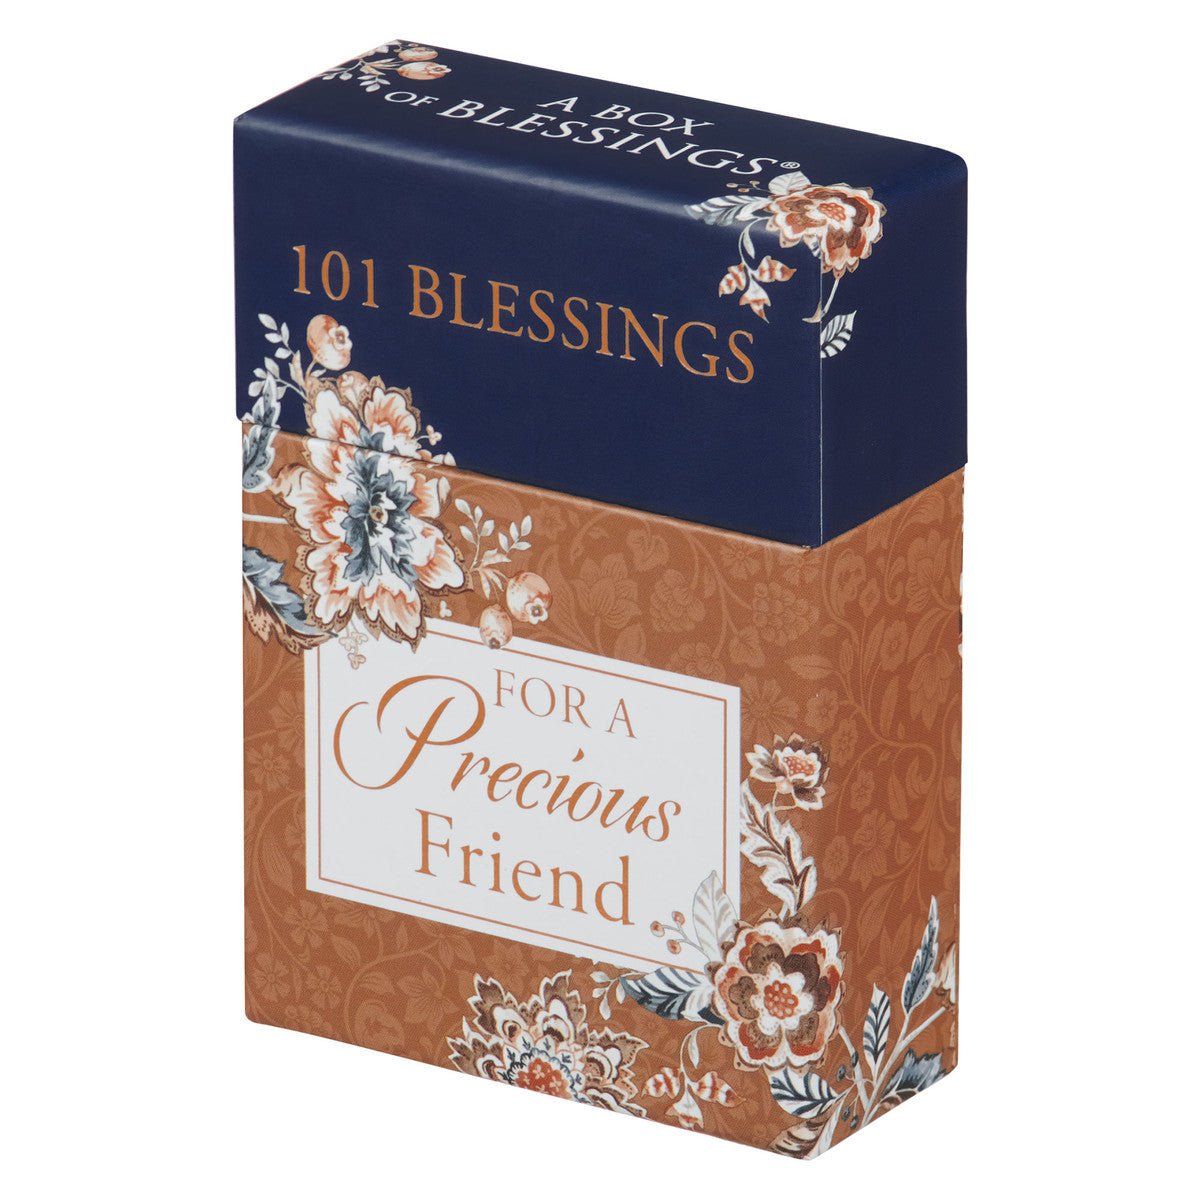 101 Blessings for a Precious Friend Box of Blessings | 2FruitBearers